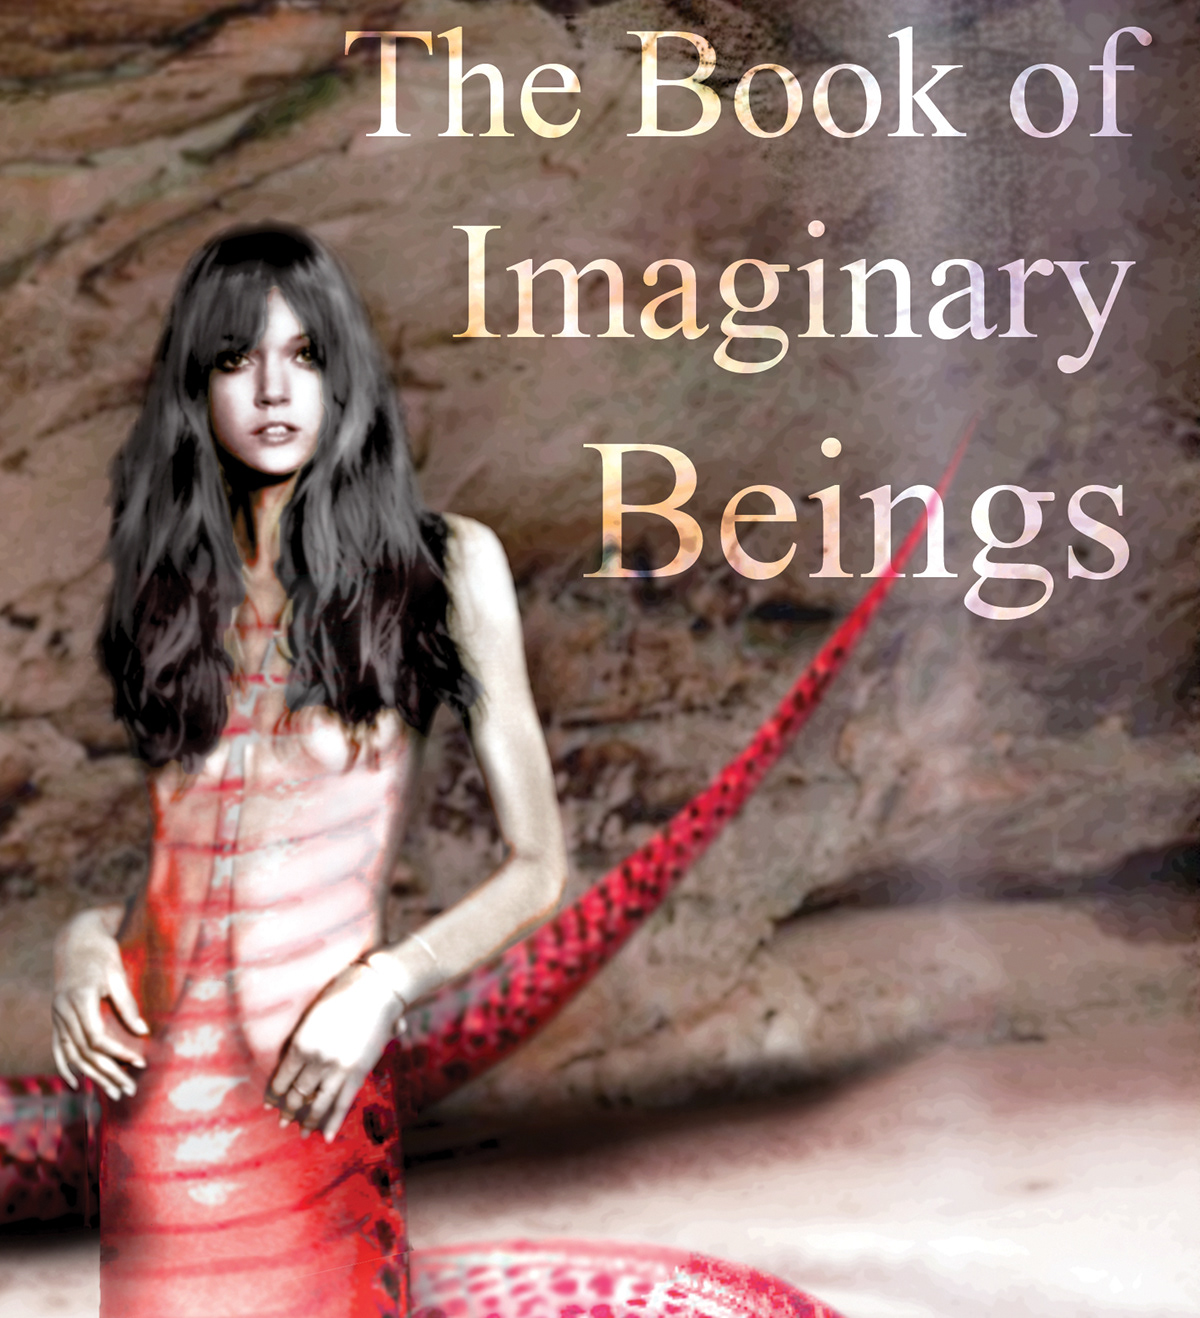 Lilith Imaginary Beings book cover iJes Syzmo